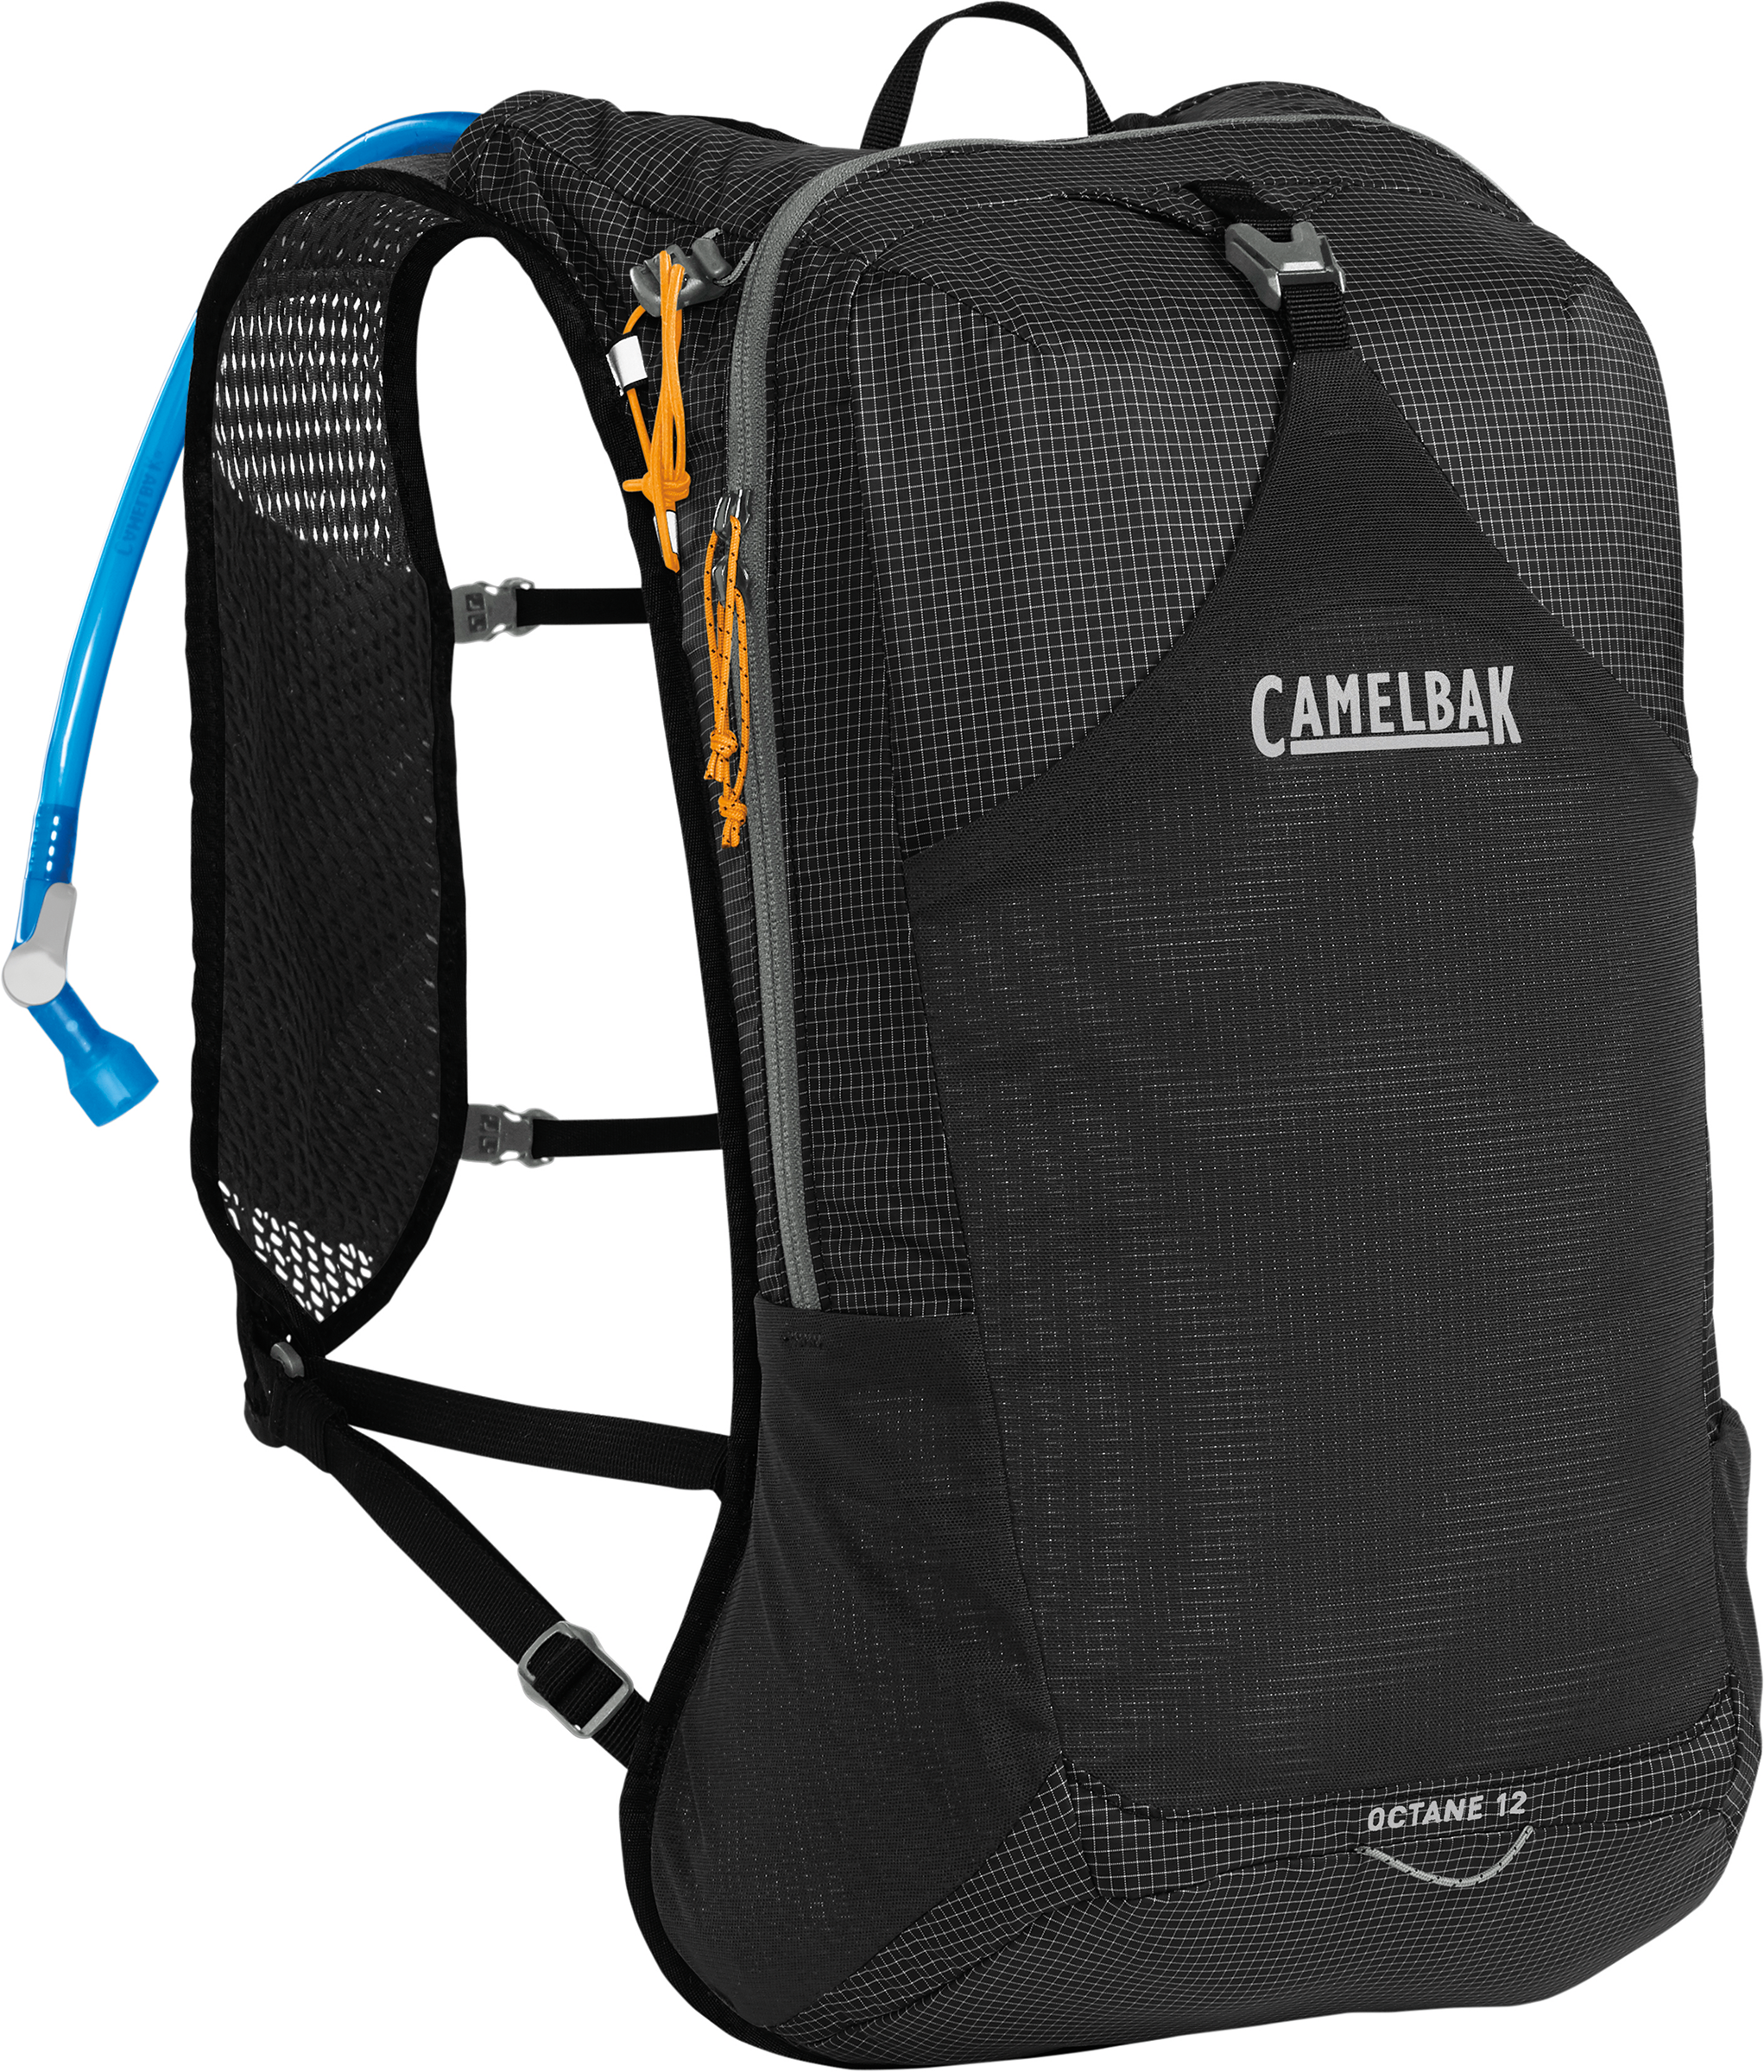 Camelbak Octaine 12 With Fusion Black/Apricot